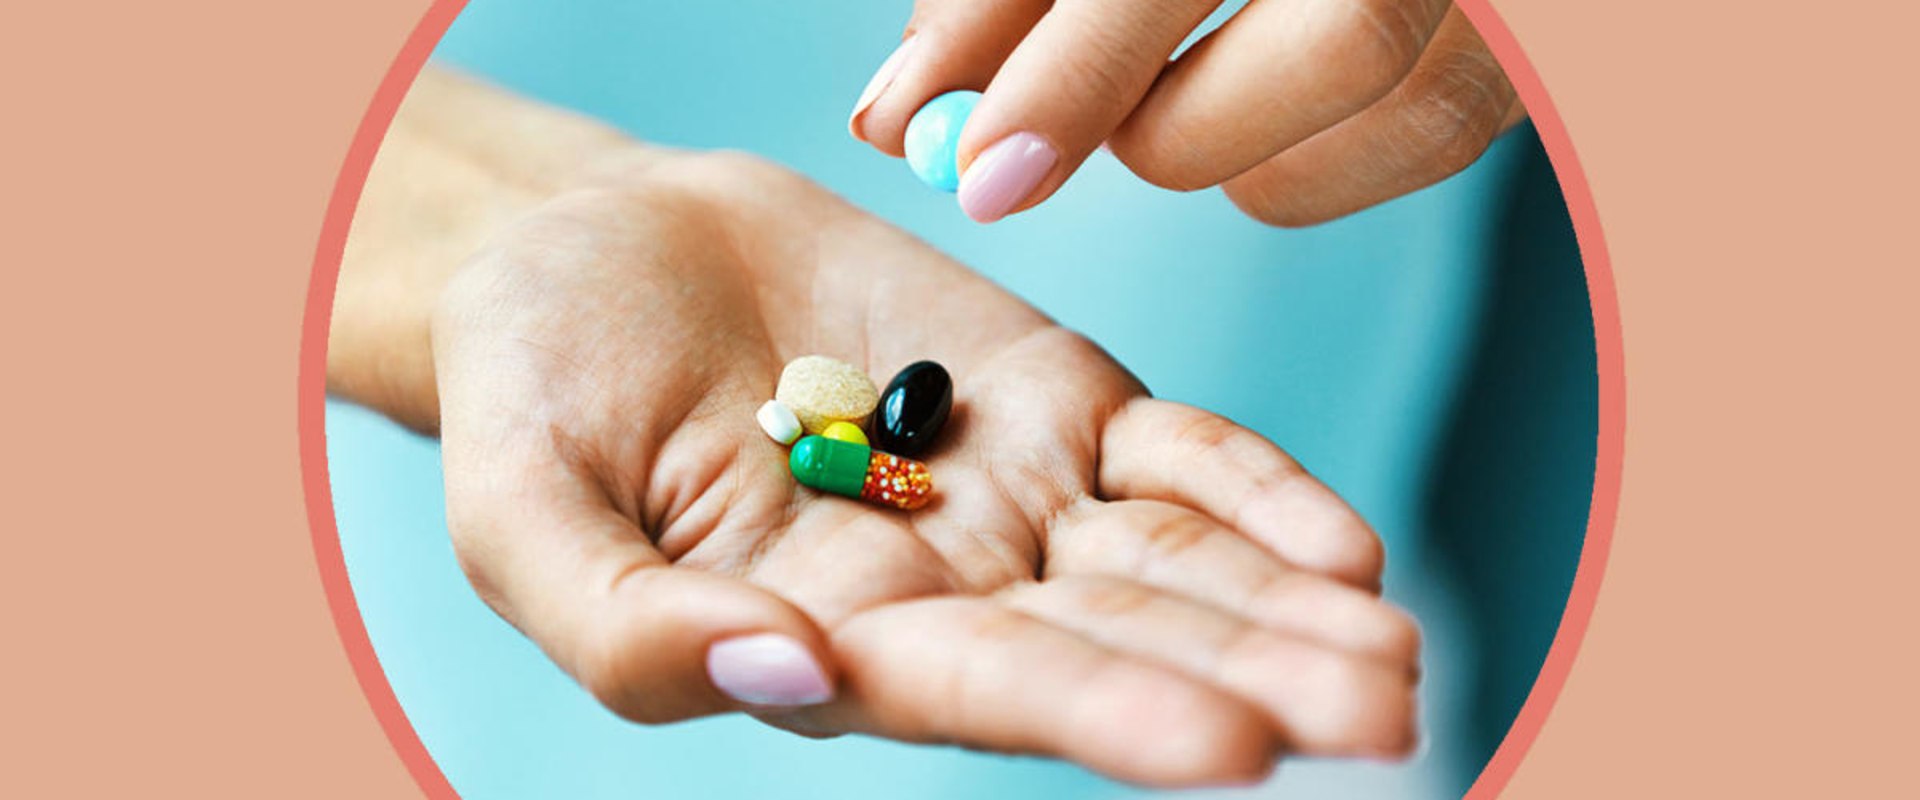 How long should i wait to take a multivitamin after taking calcium?